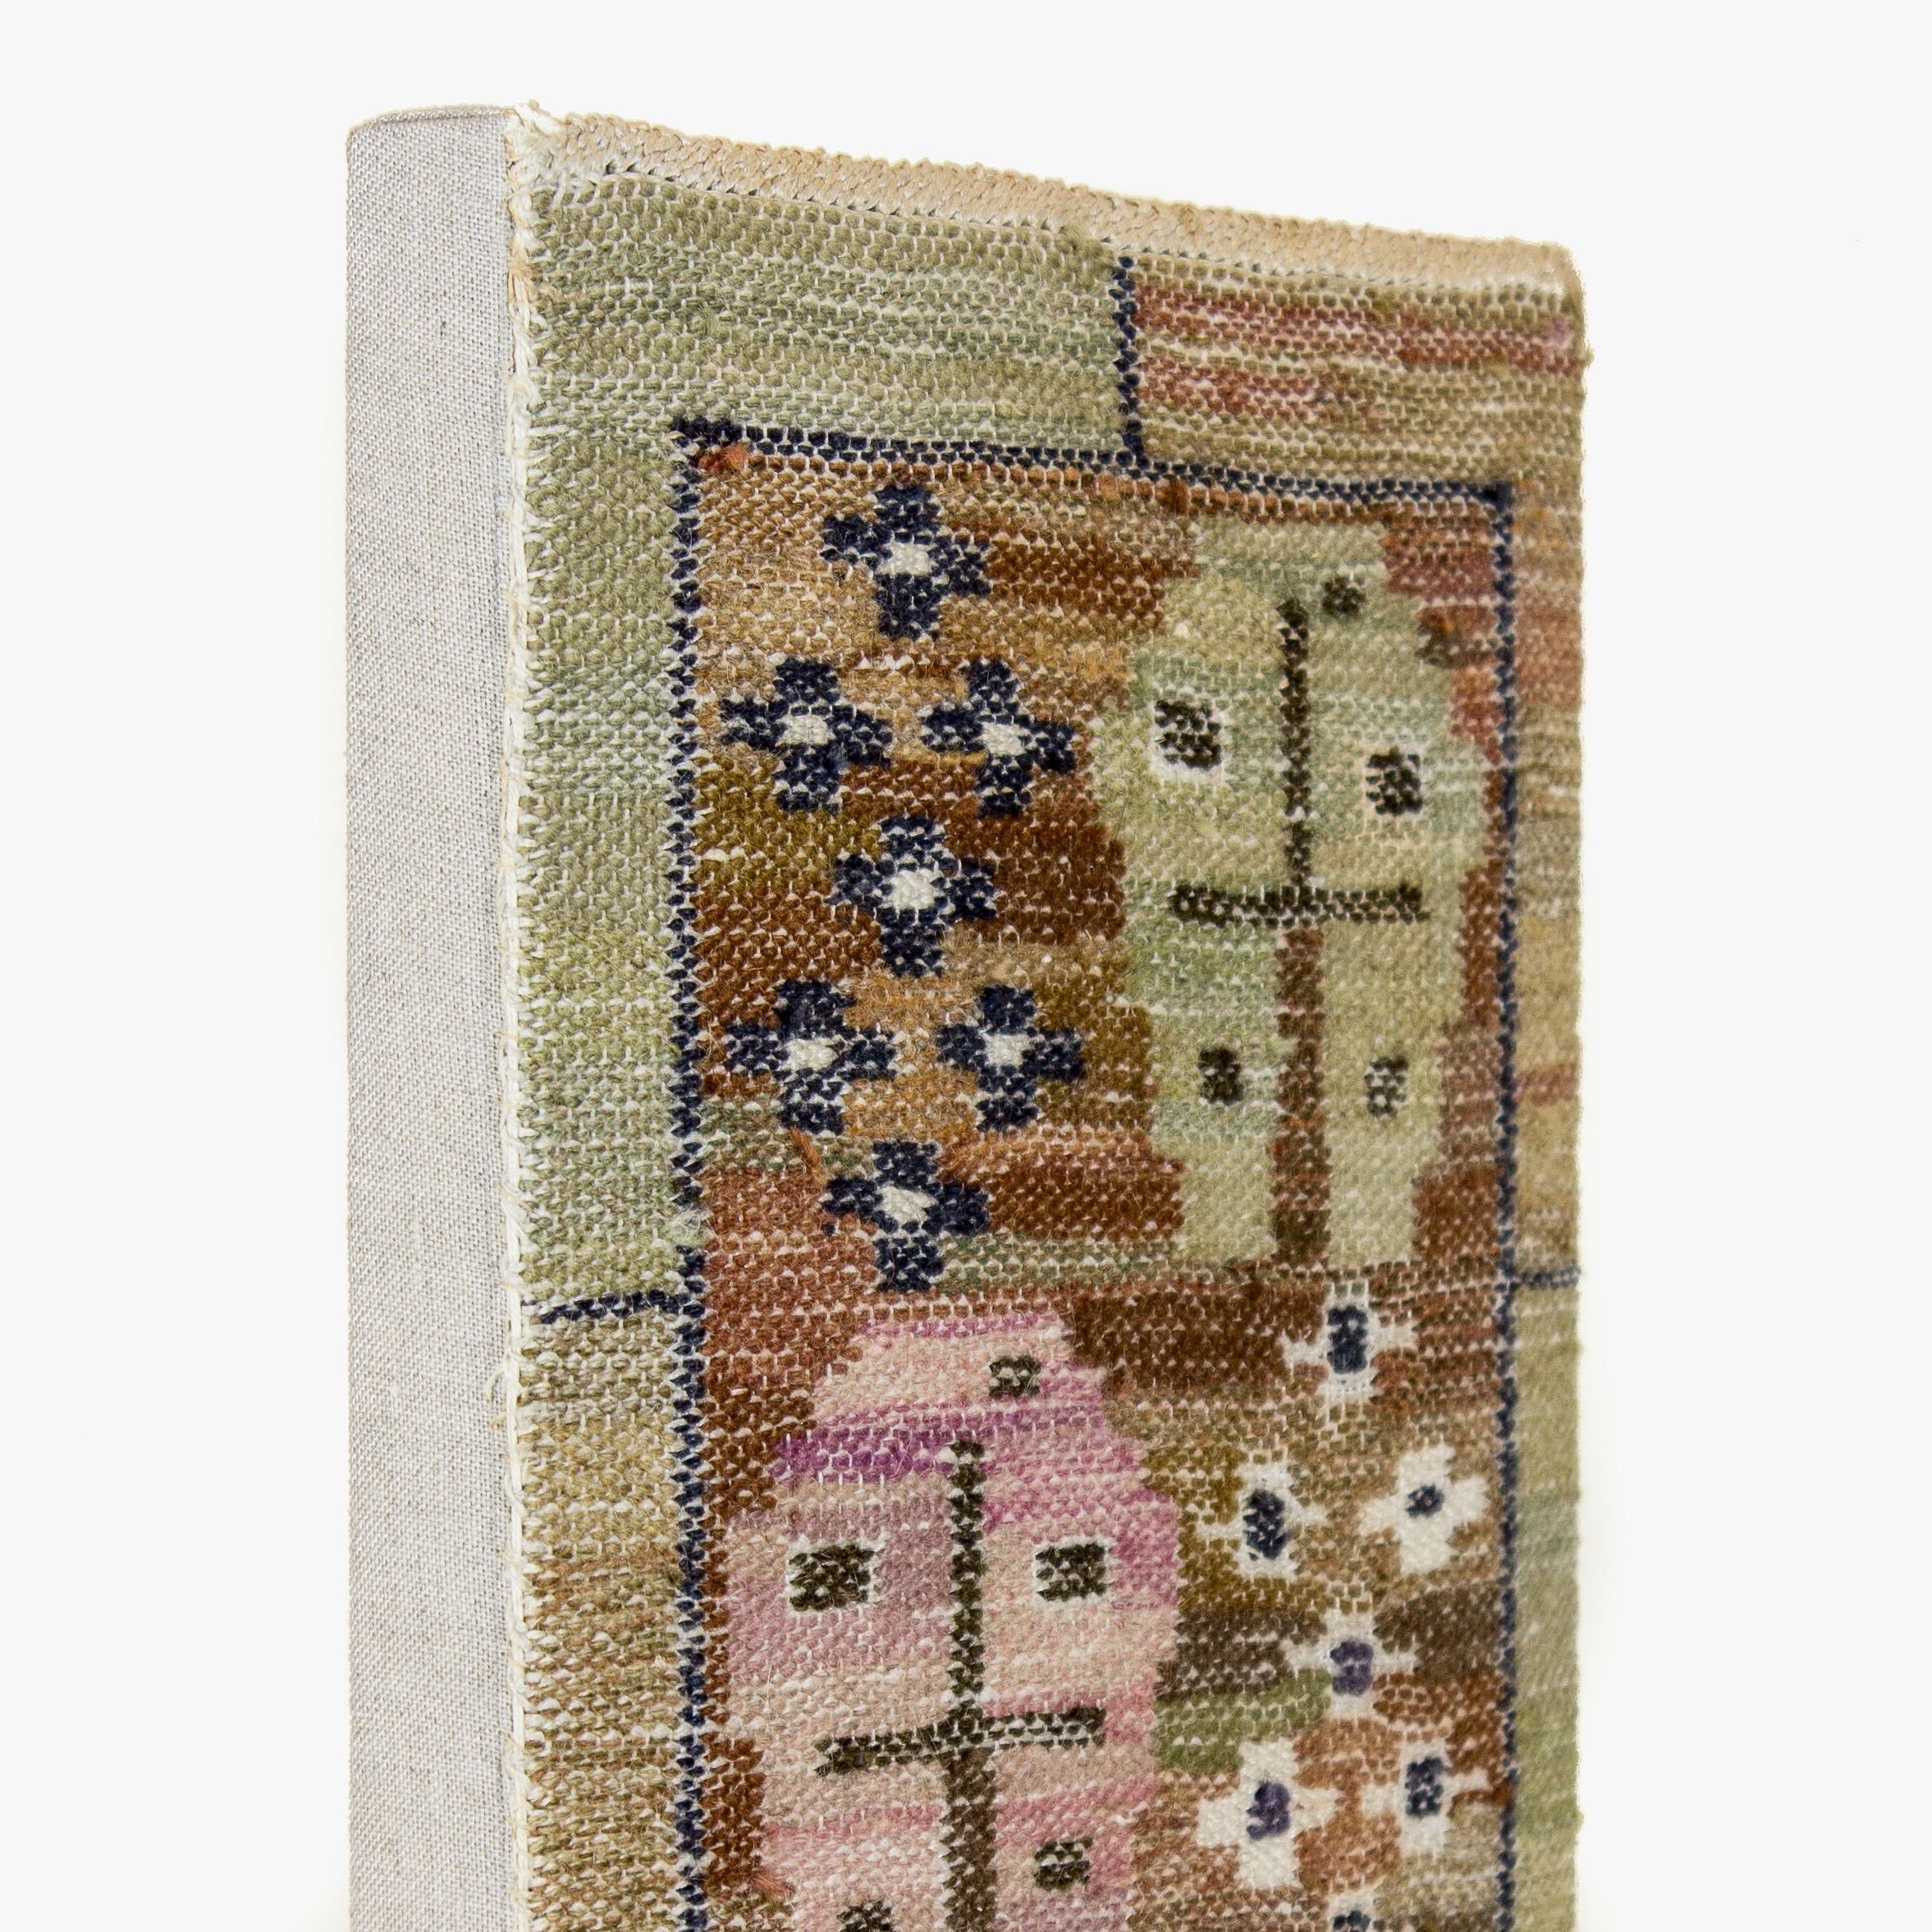 Woven in tones of vegetable dyed greens, pinks and browns by Marta-Maas Fjetterstrom AB.

Sweden, woven post 1941.